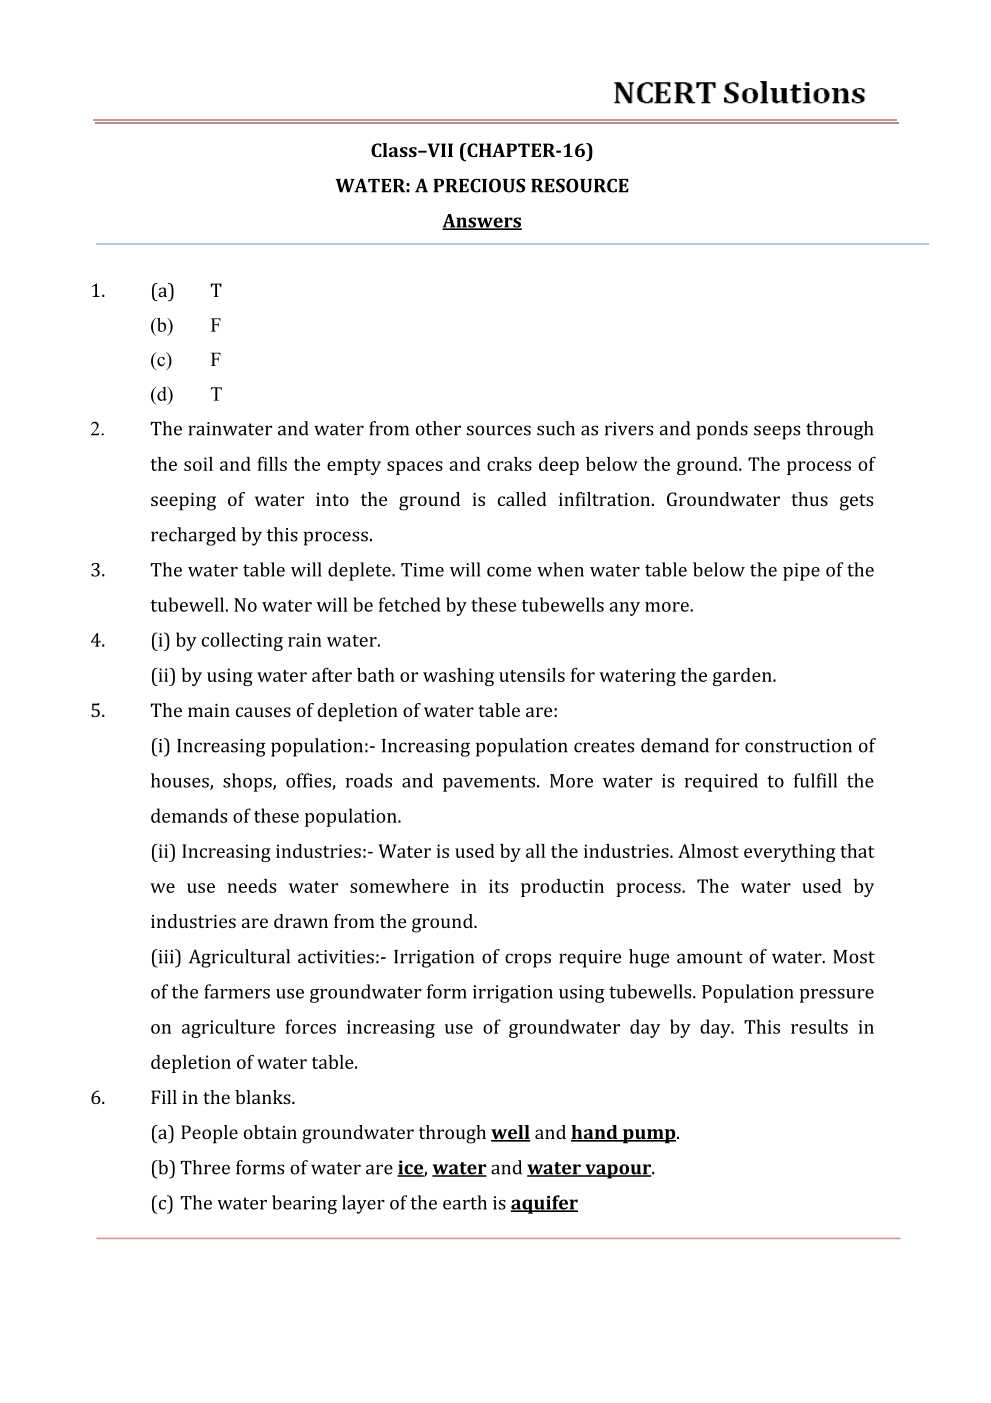 NCERT Solutions For Class 7 science Chapter 16 Water – A Precious Resource